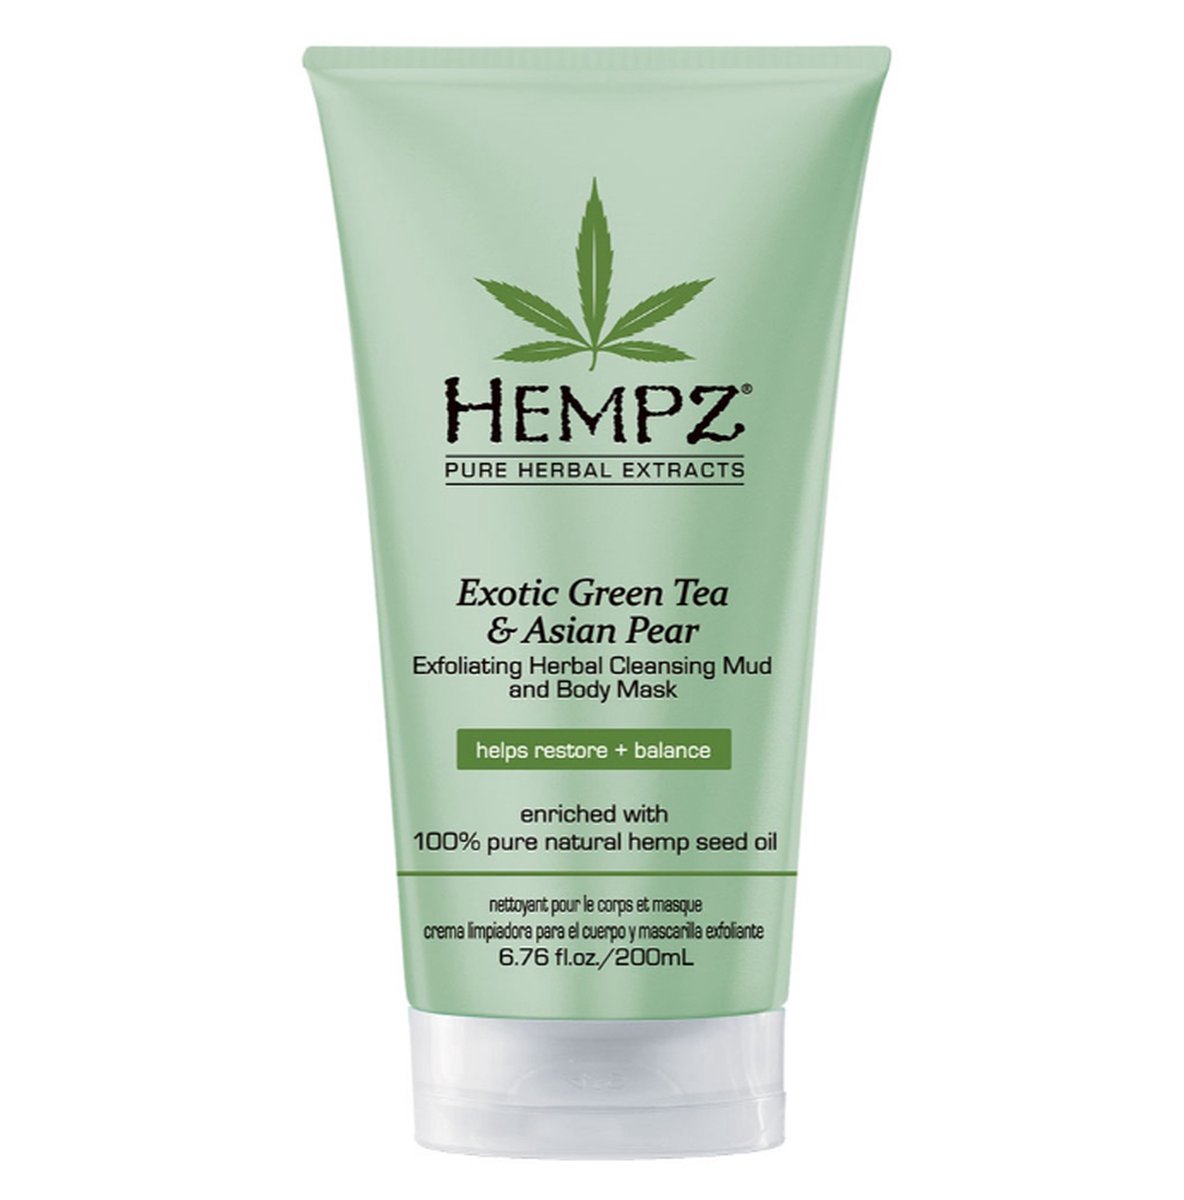 Hempz Exotic Green Tea & AsianPear Exfoliating Herbal Cleasing Mud and Body Mask